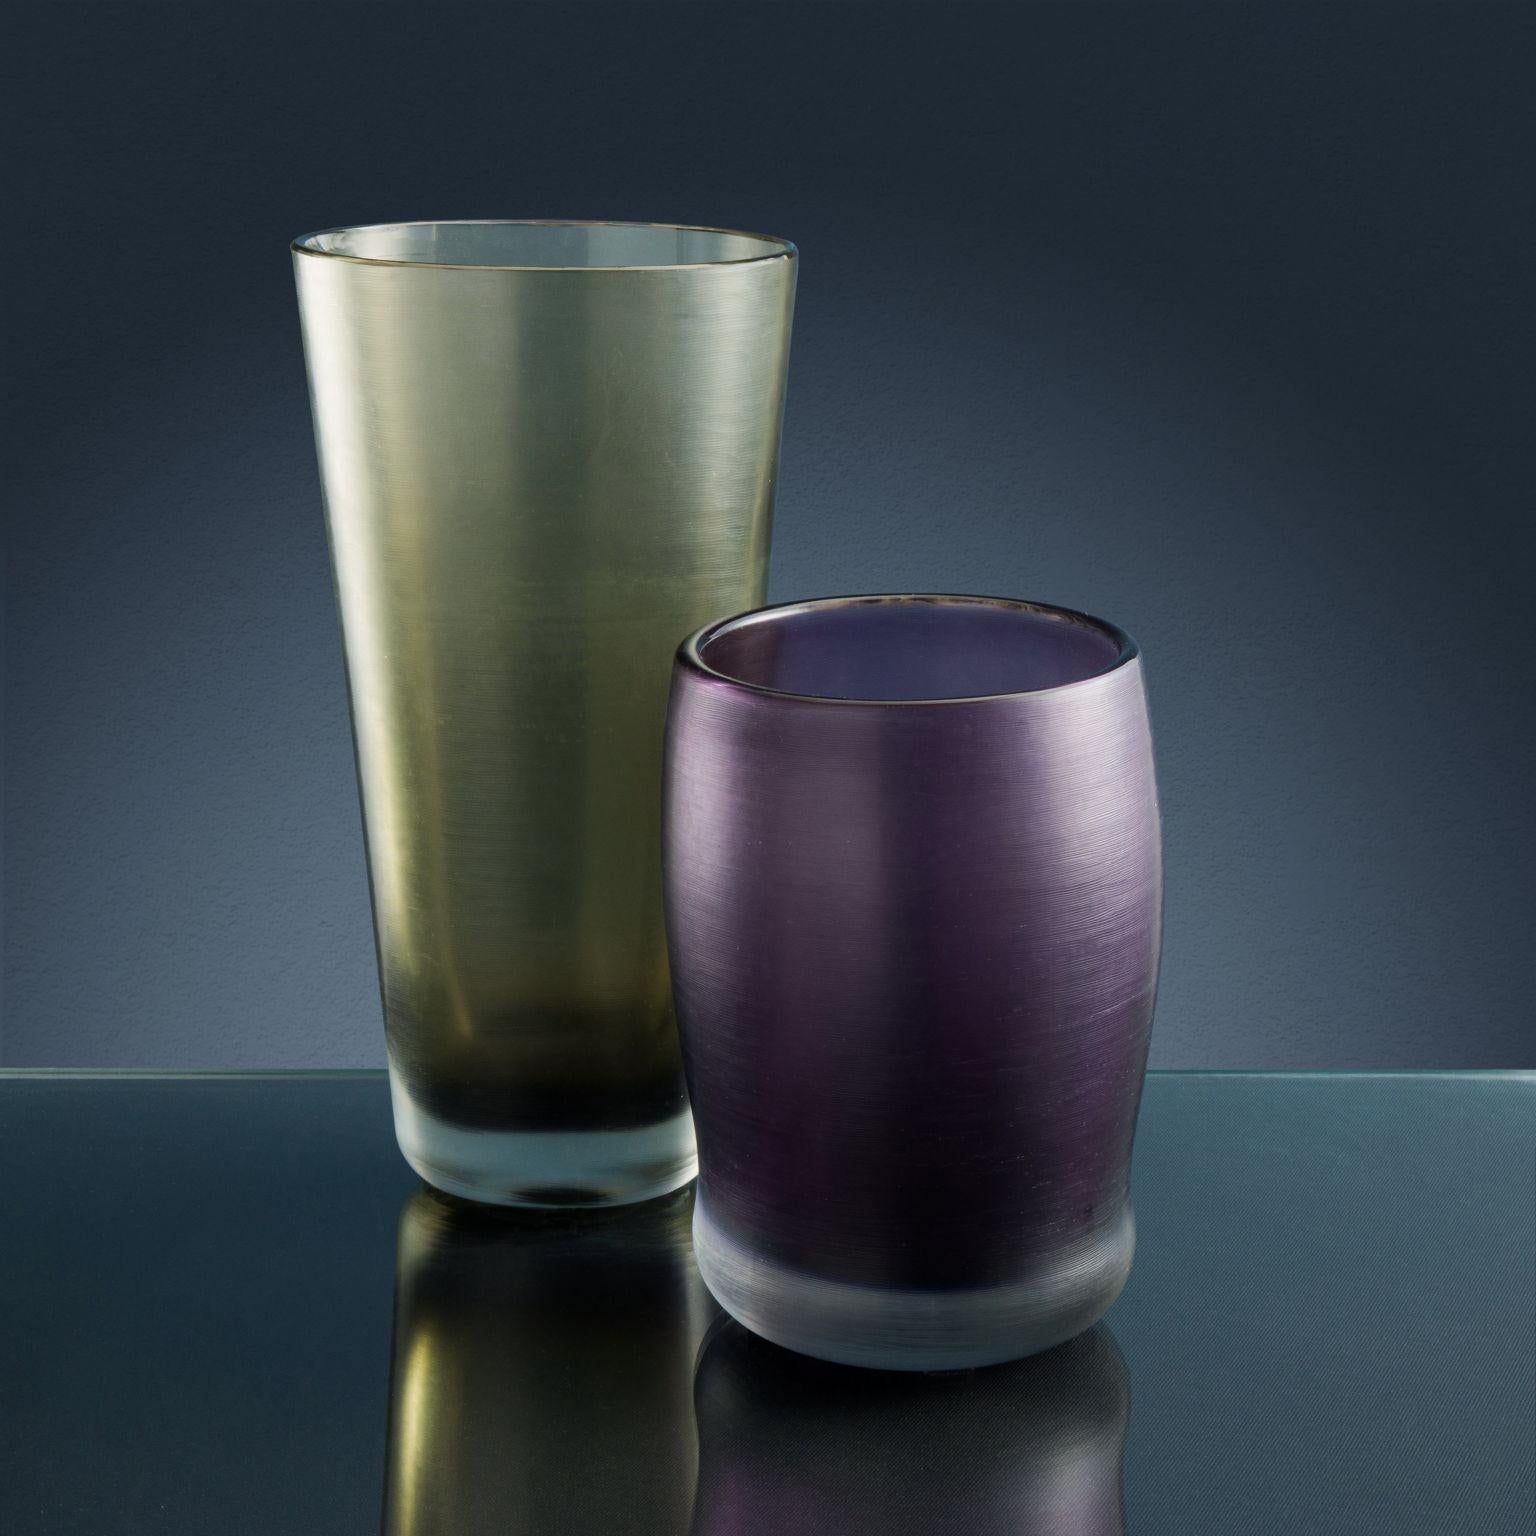 Pair of Murano glass vases of different sizes, “Incisi” series, made to designs by Paolo Venini. Heavy violet and iron gray glass in superimposed colors, finished with light horizontal incisions on the entire surface. Drawings n° 3681 and 4810 of